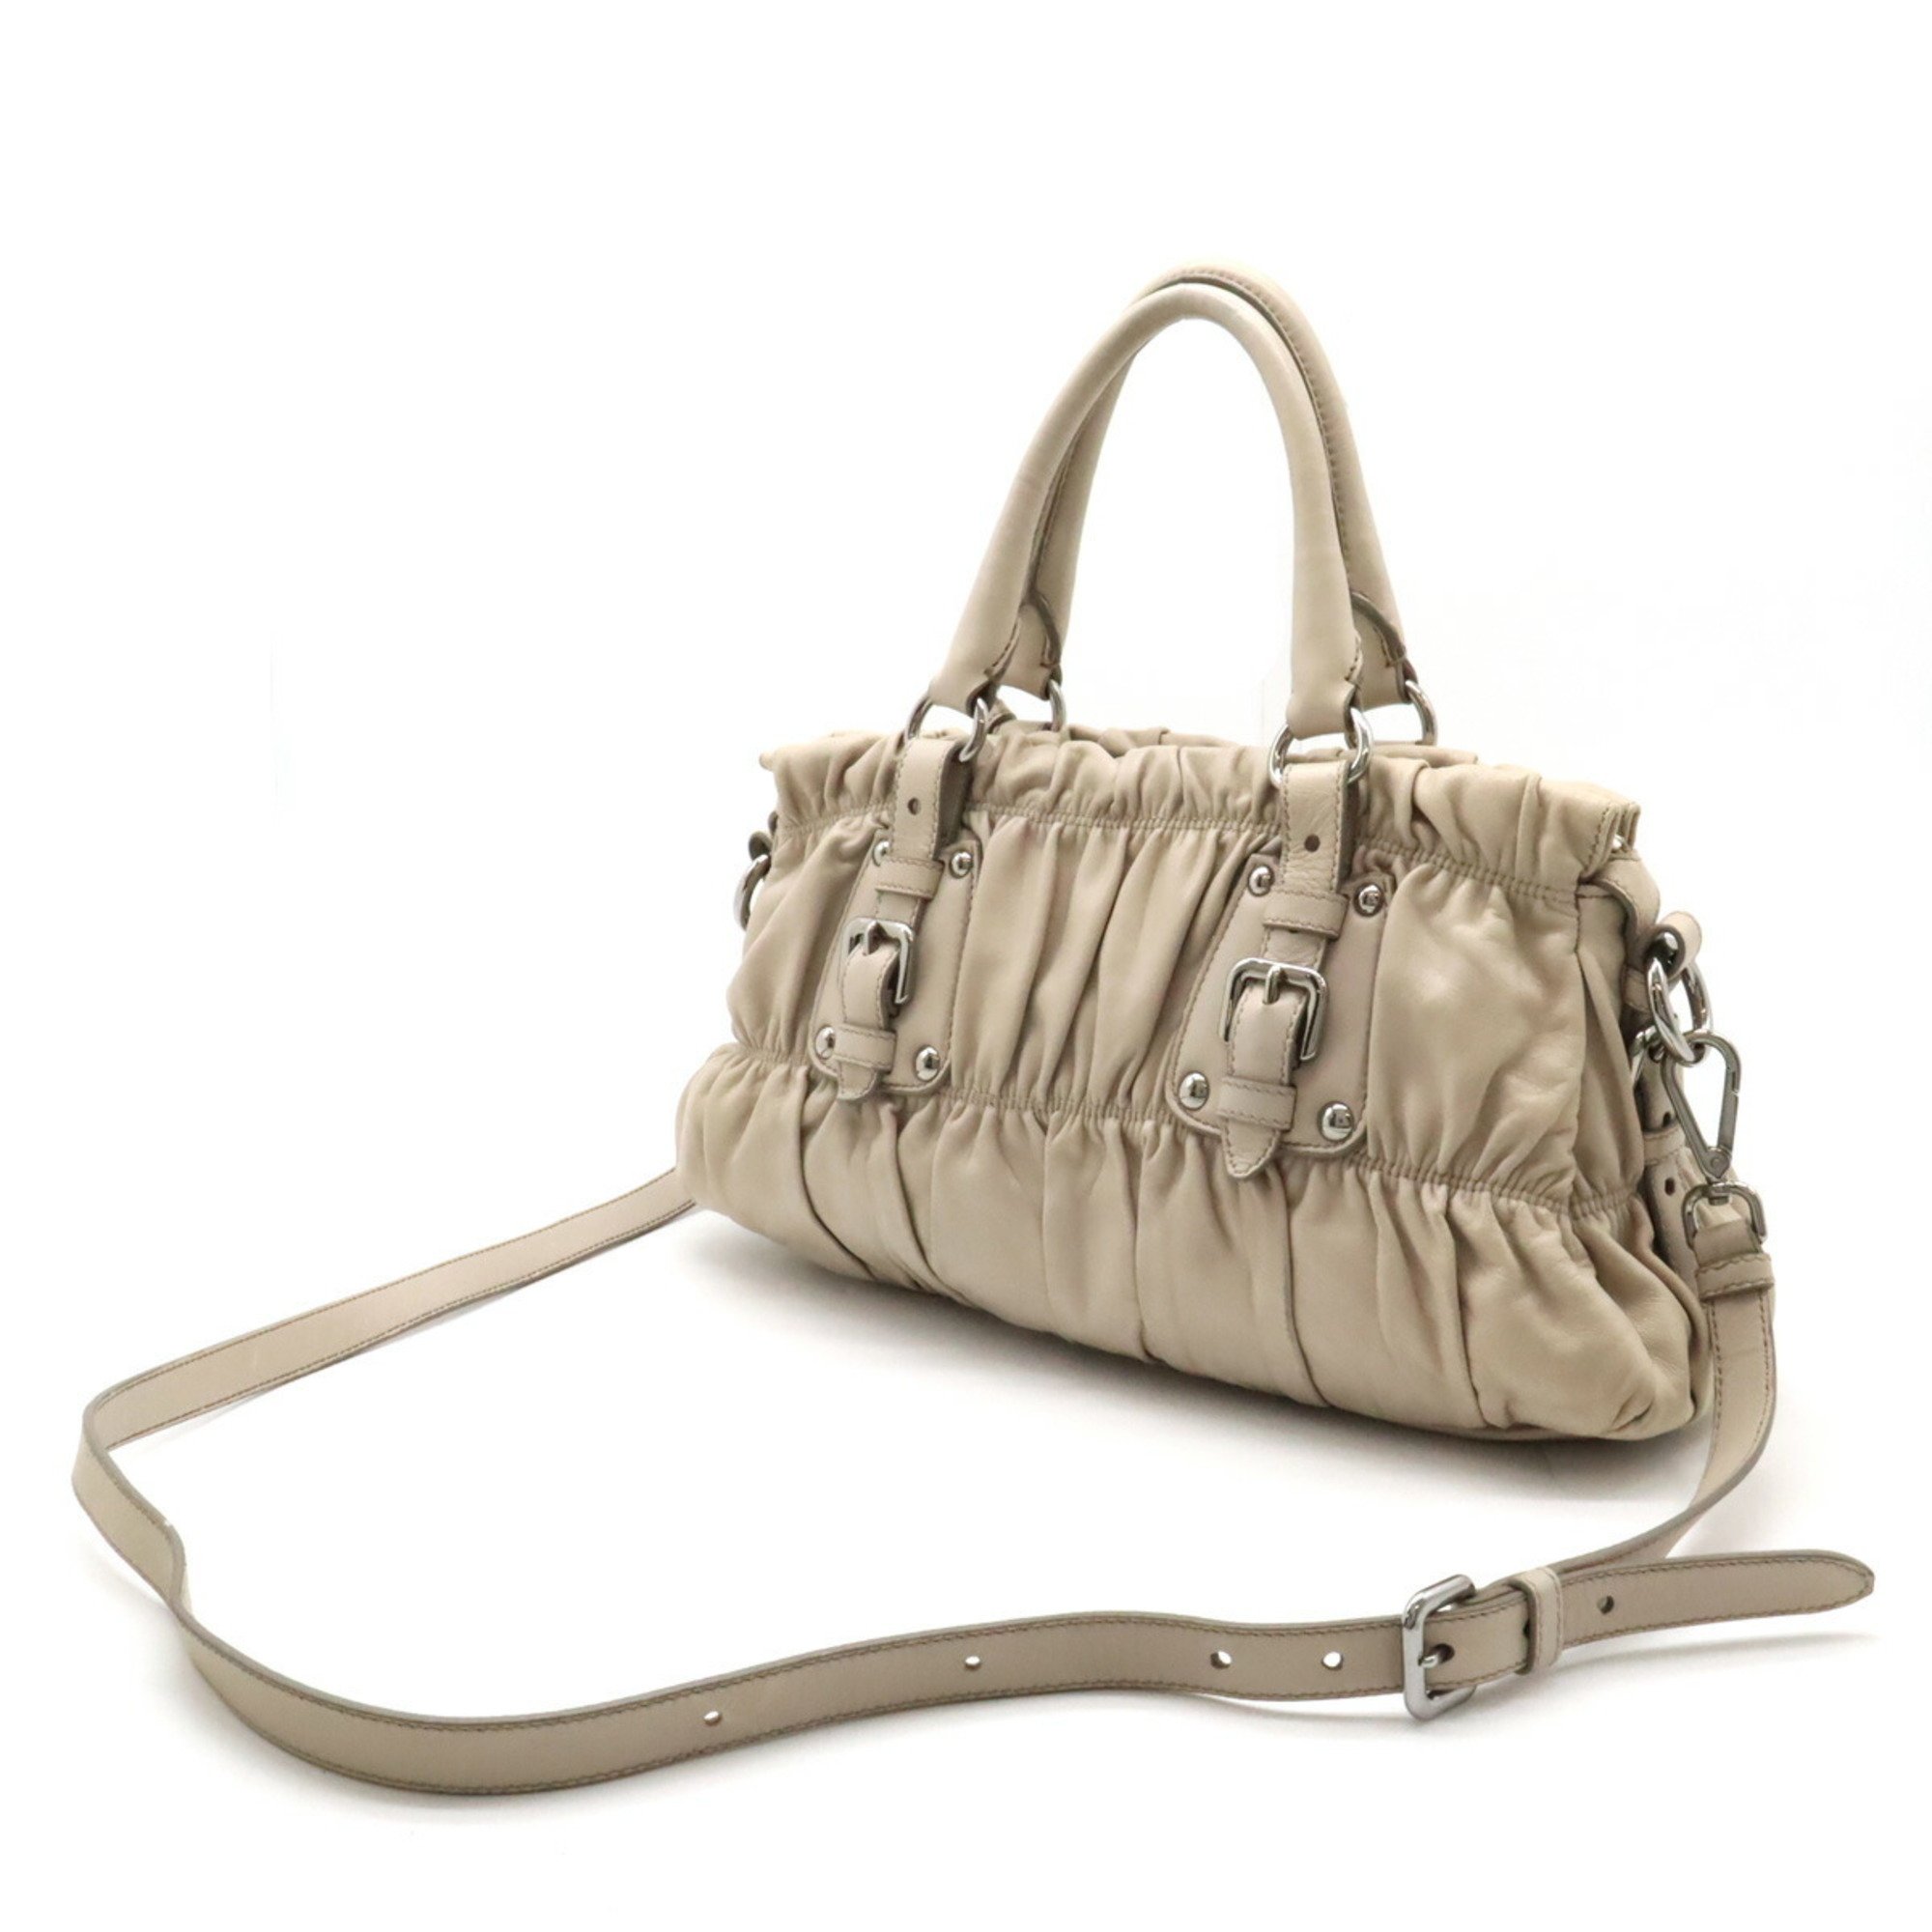 PRADA Gathered Handbag Tote Bag Nappa Leather POMICE Greige Purchased at an overseas boutique BN1407